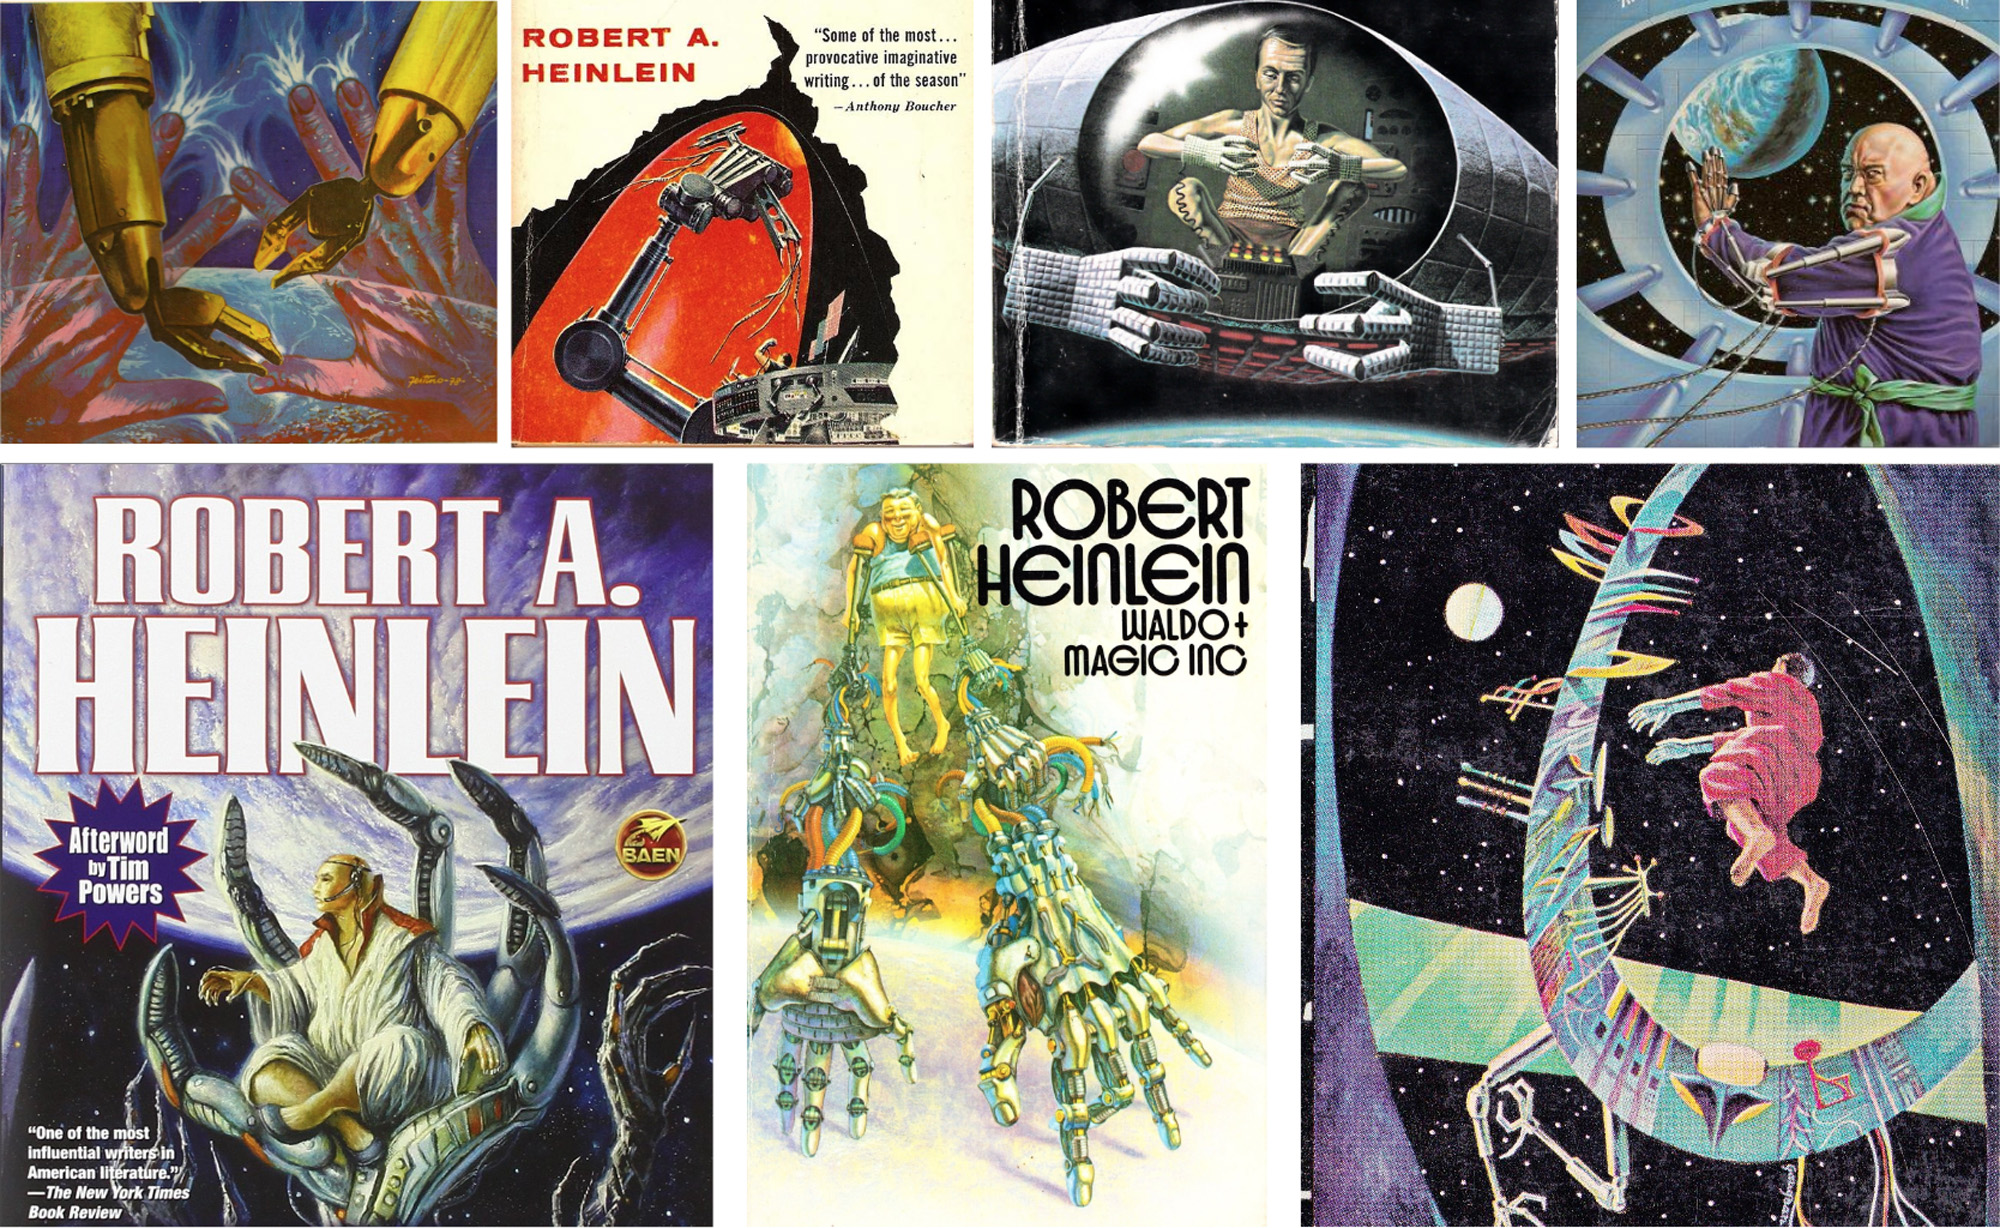 Cover illustration details from different editions of Robert Heinlein’s 1942 short story Waldo.